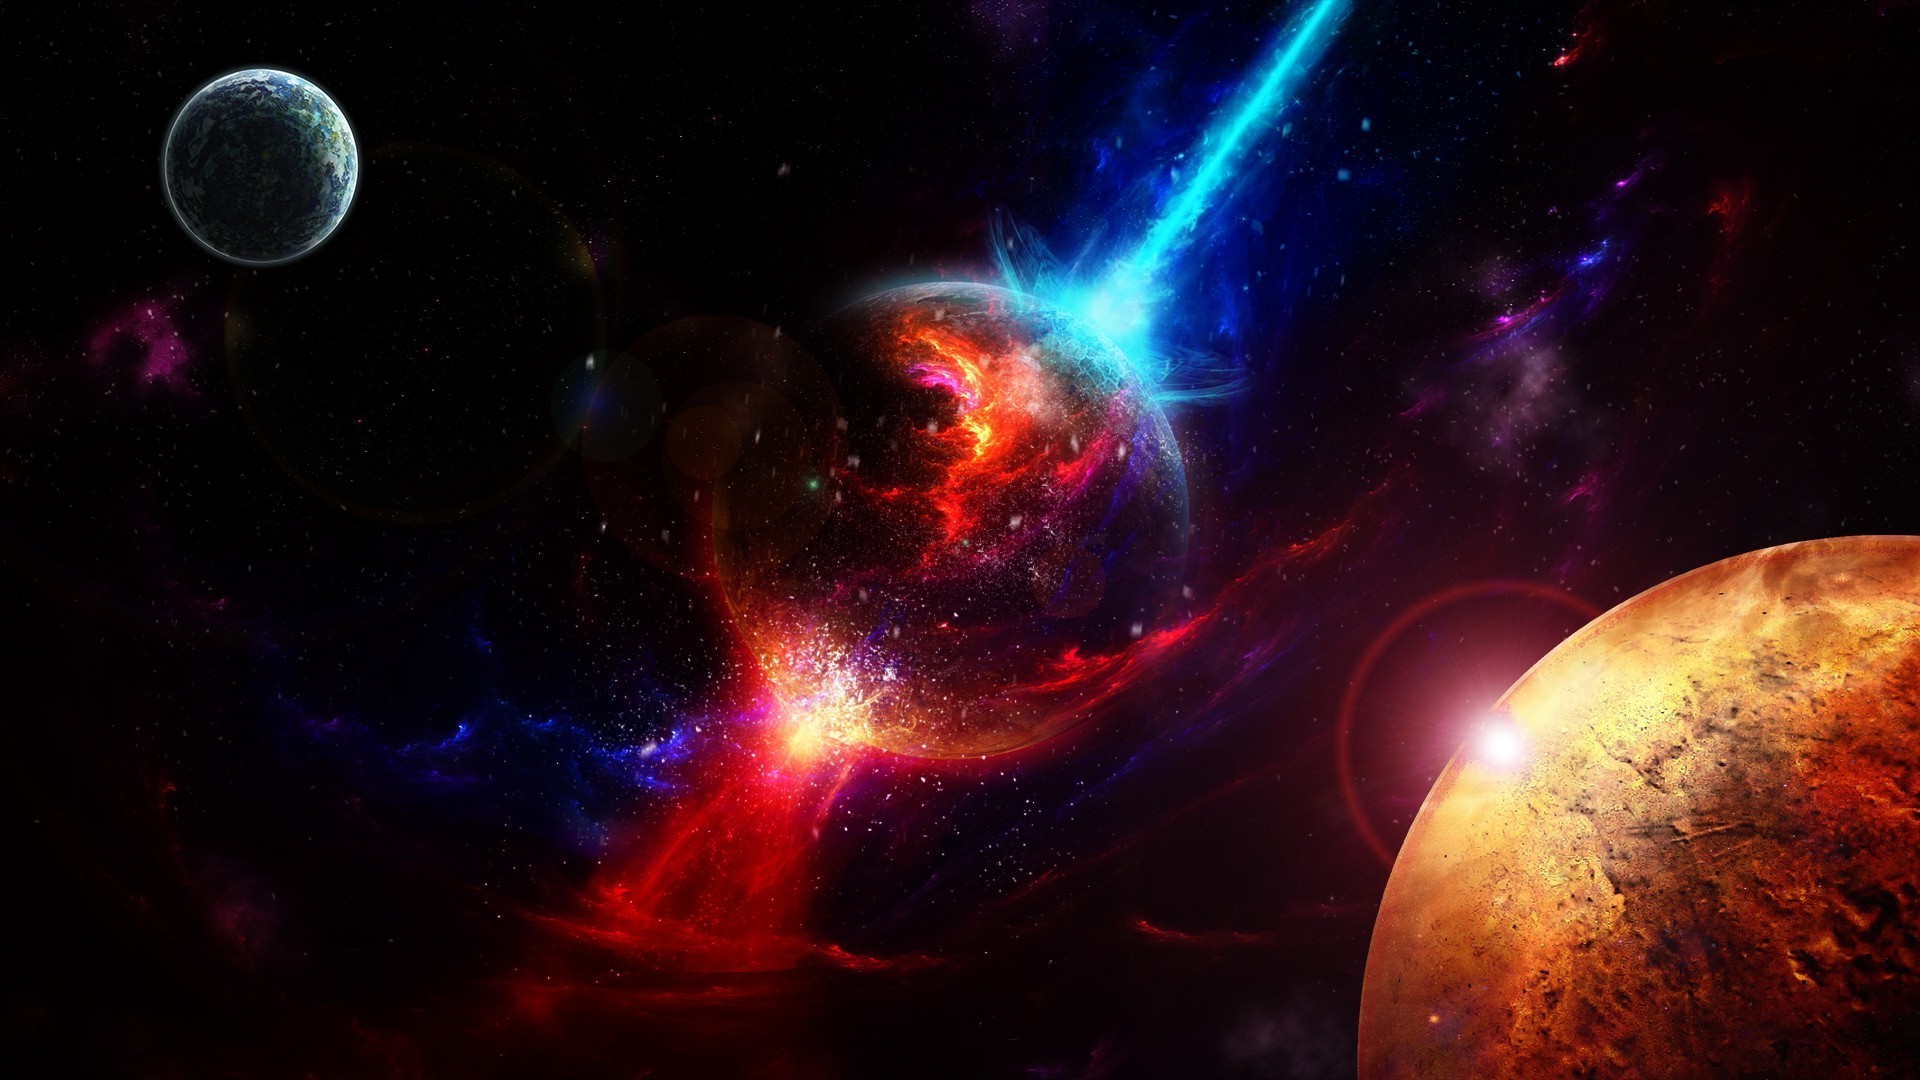 Supernova Explosion Wallpaper HD Pics About Space